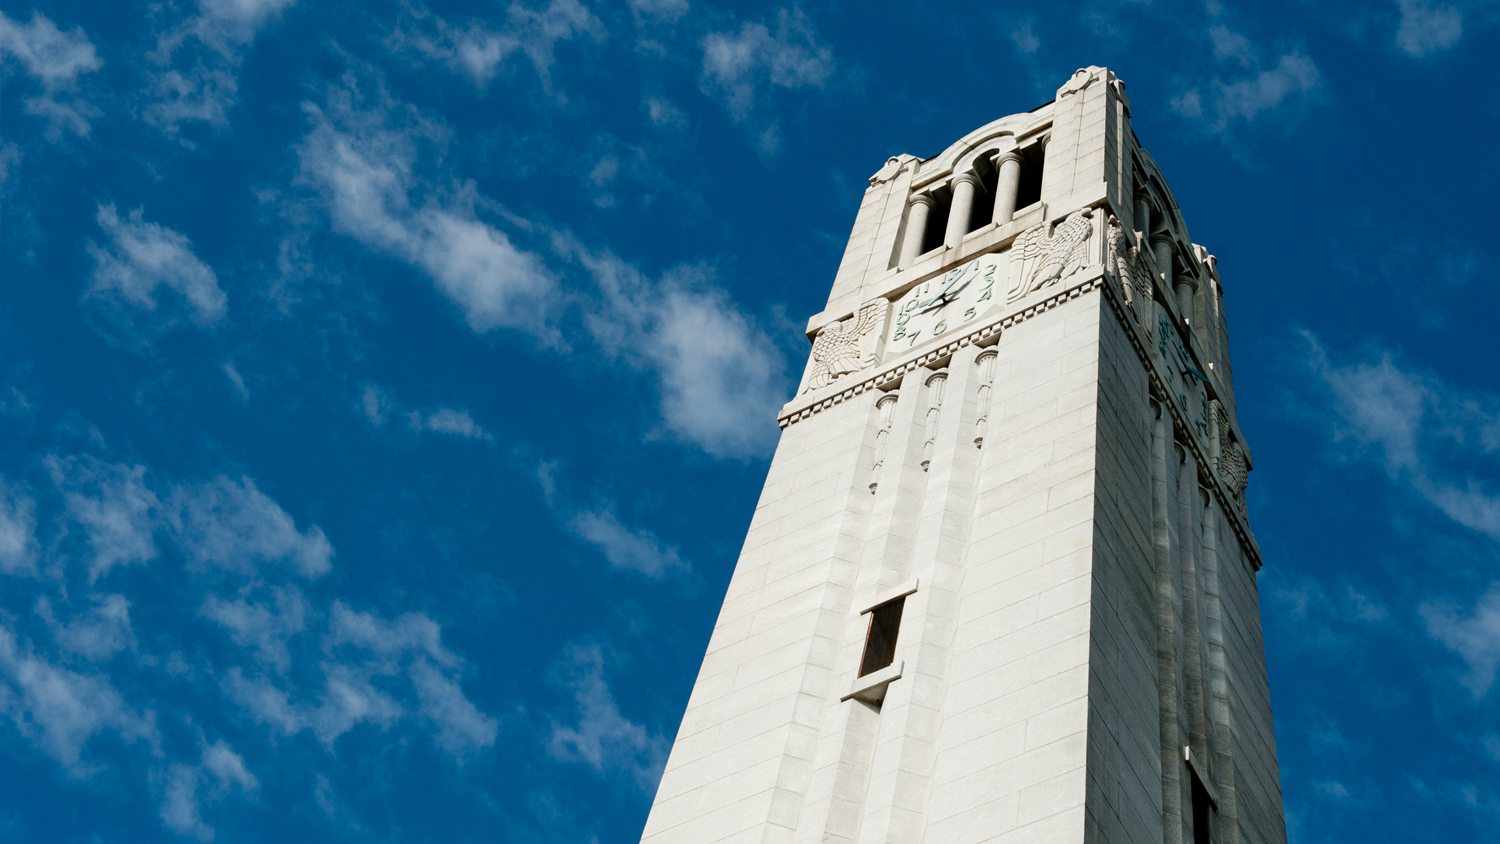 The NC State belltower